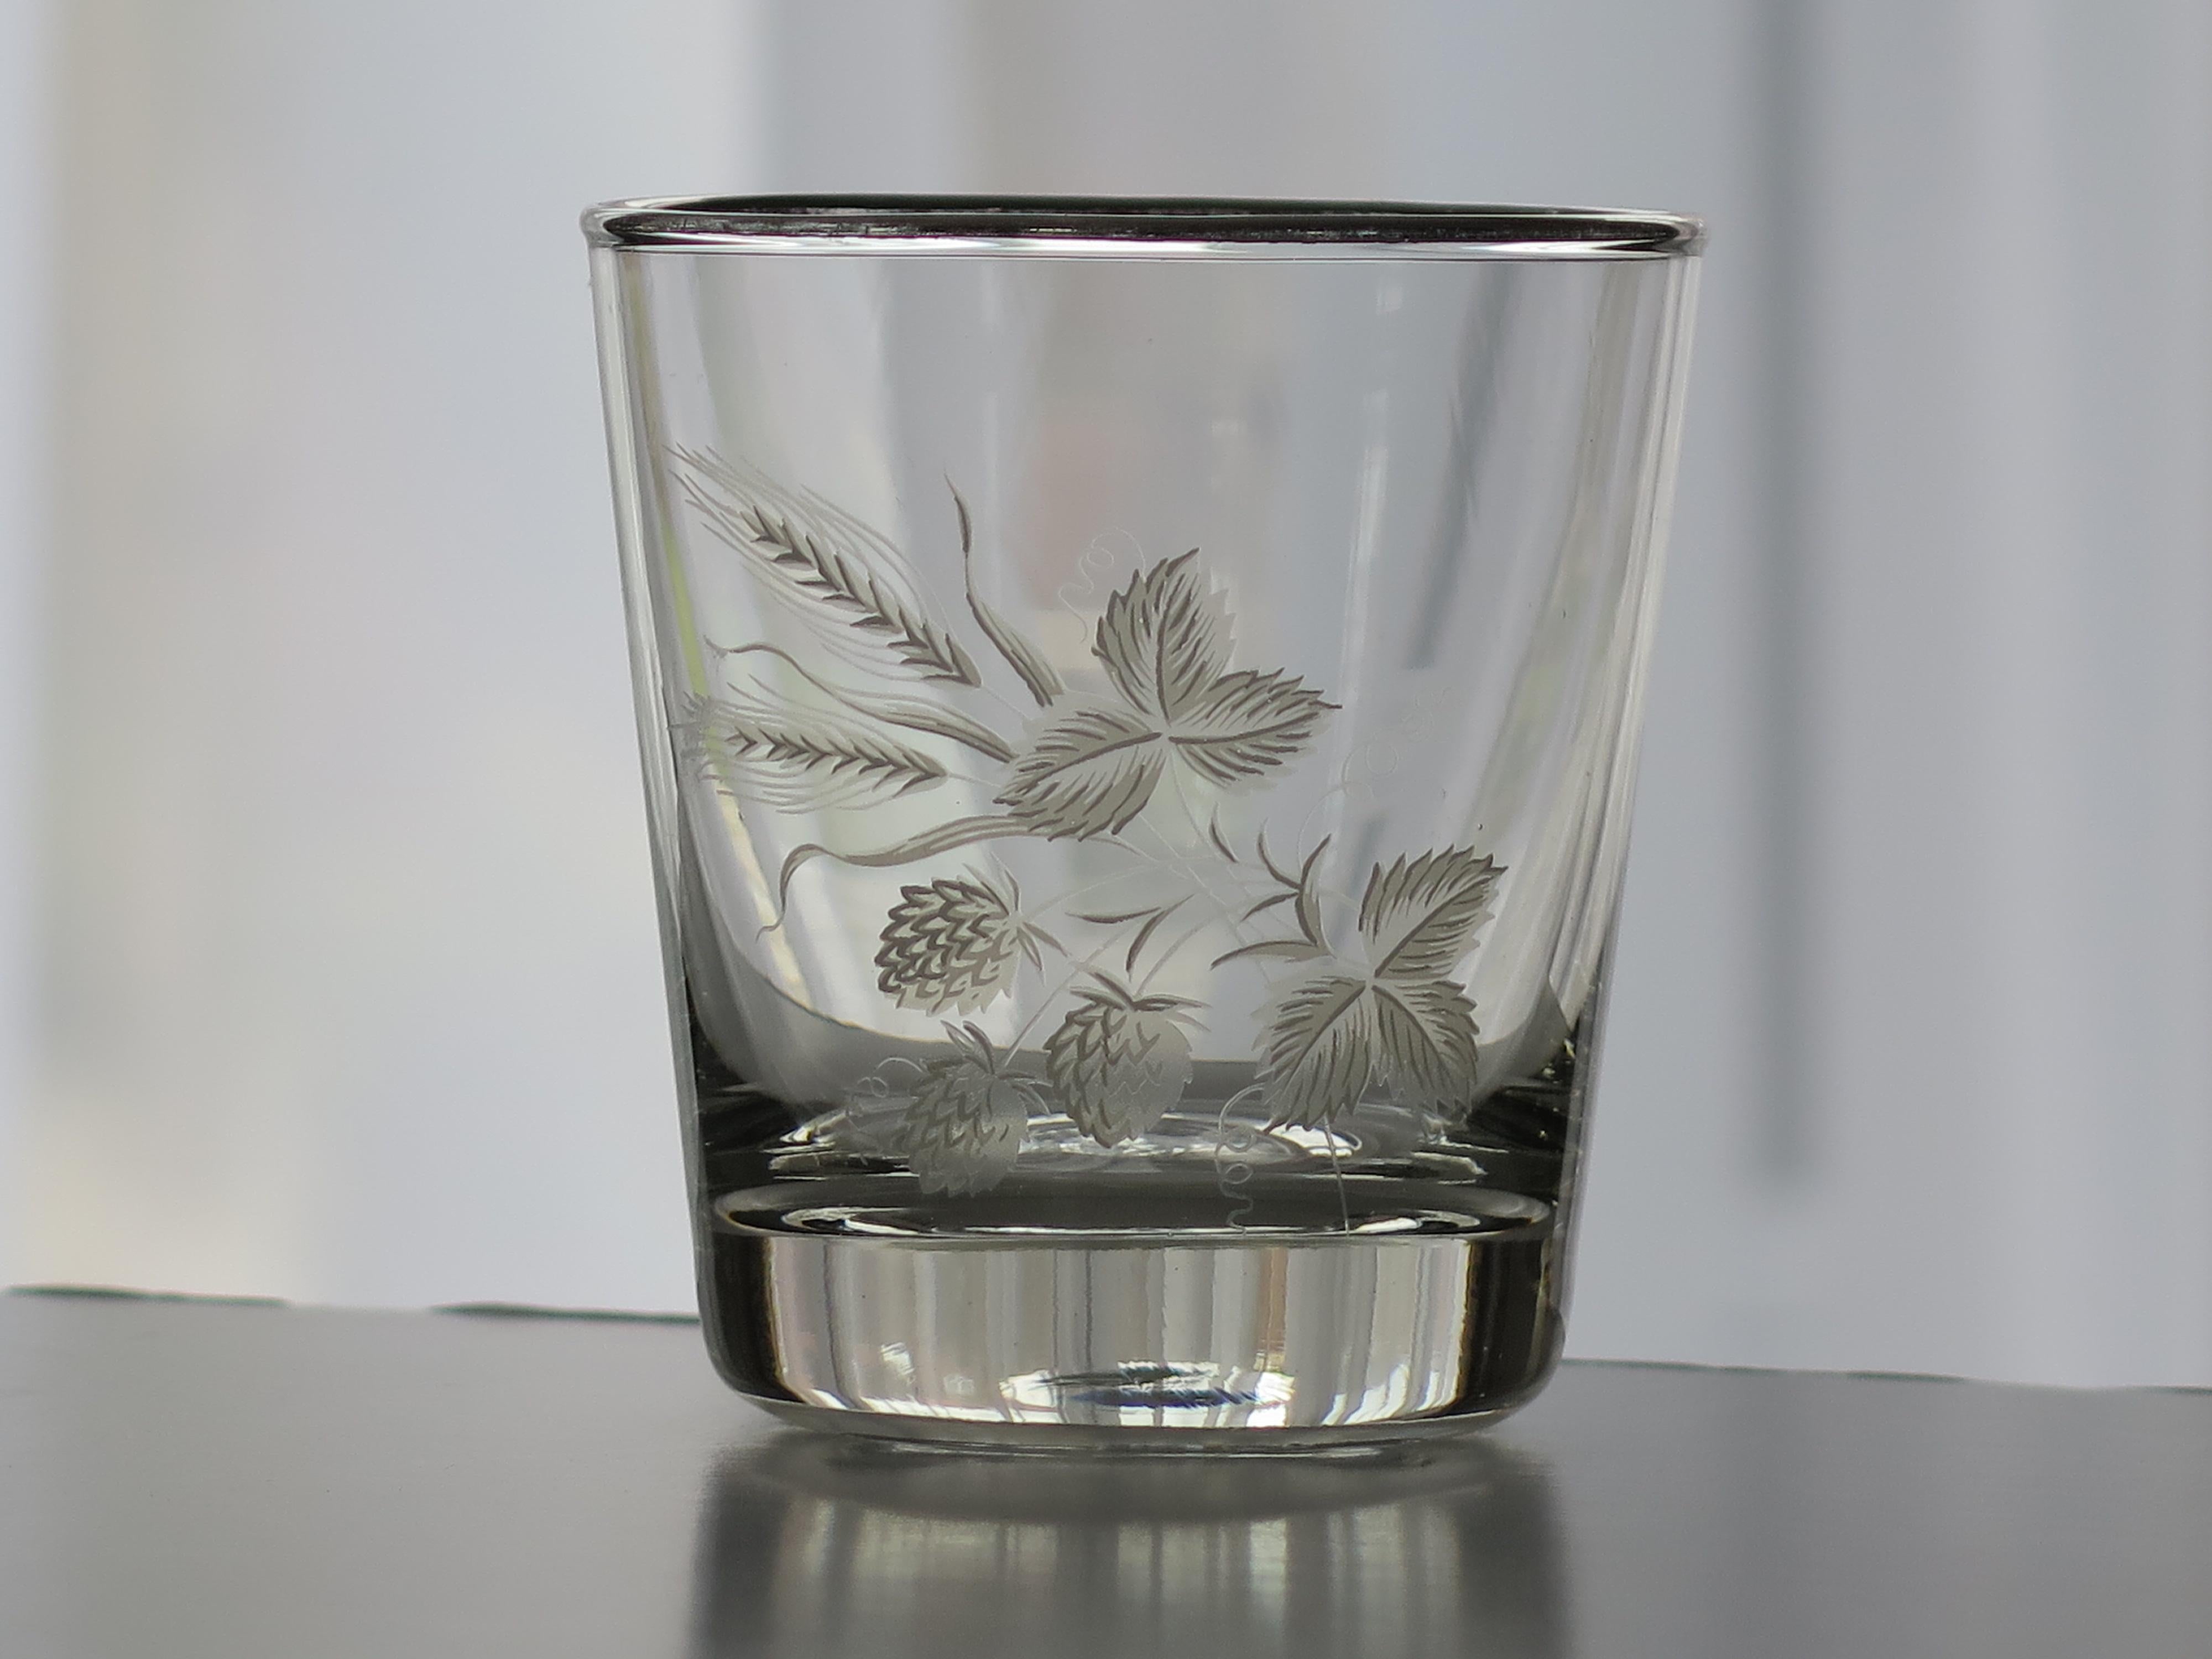 Engraved Set of SIX Whisky Drinking Glasses Barley Decoration & Silver Rim, circa 1950s For Sale